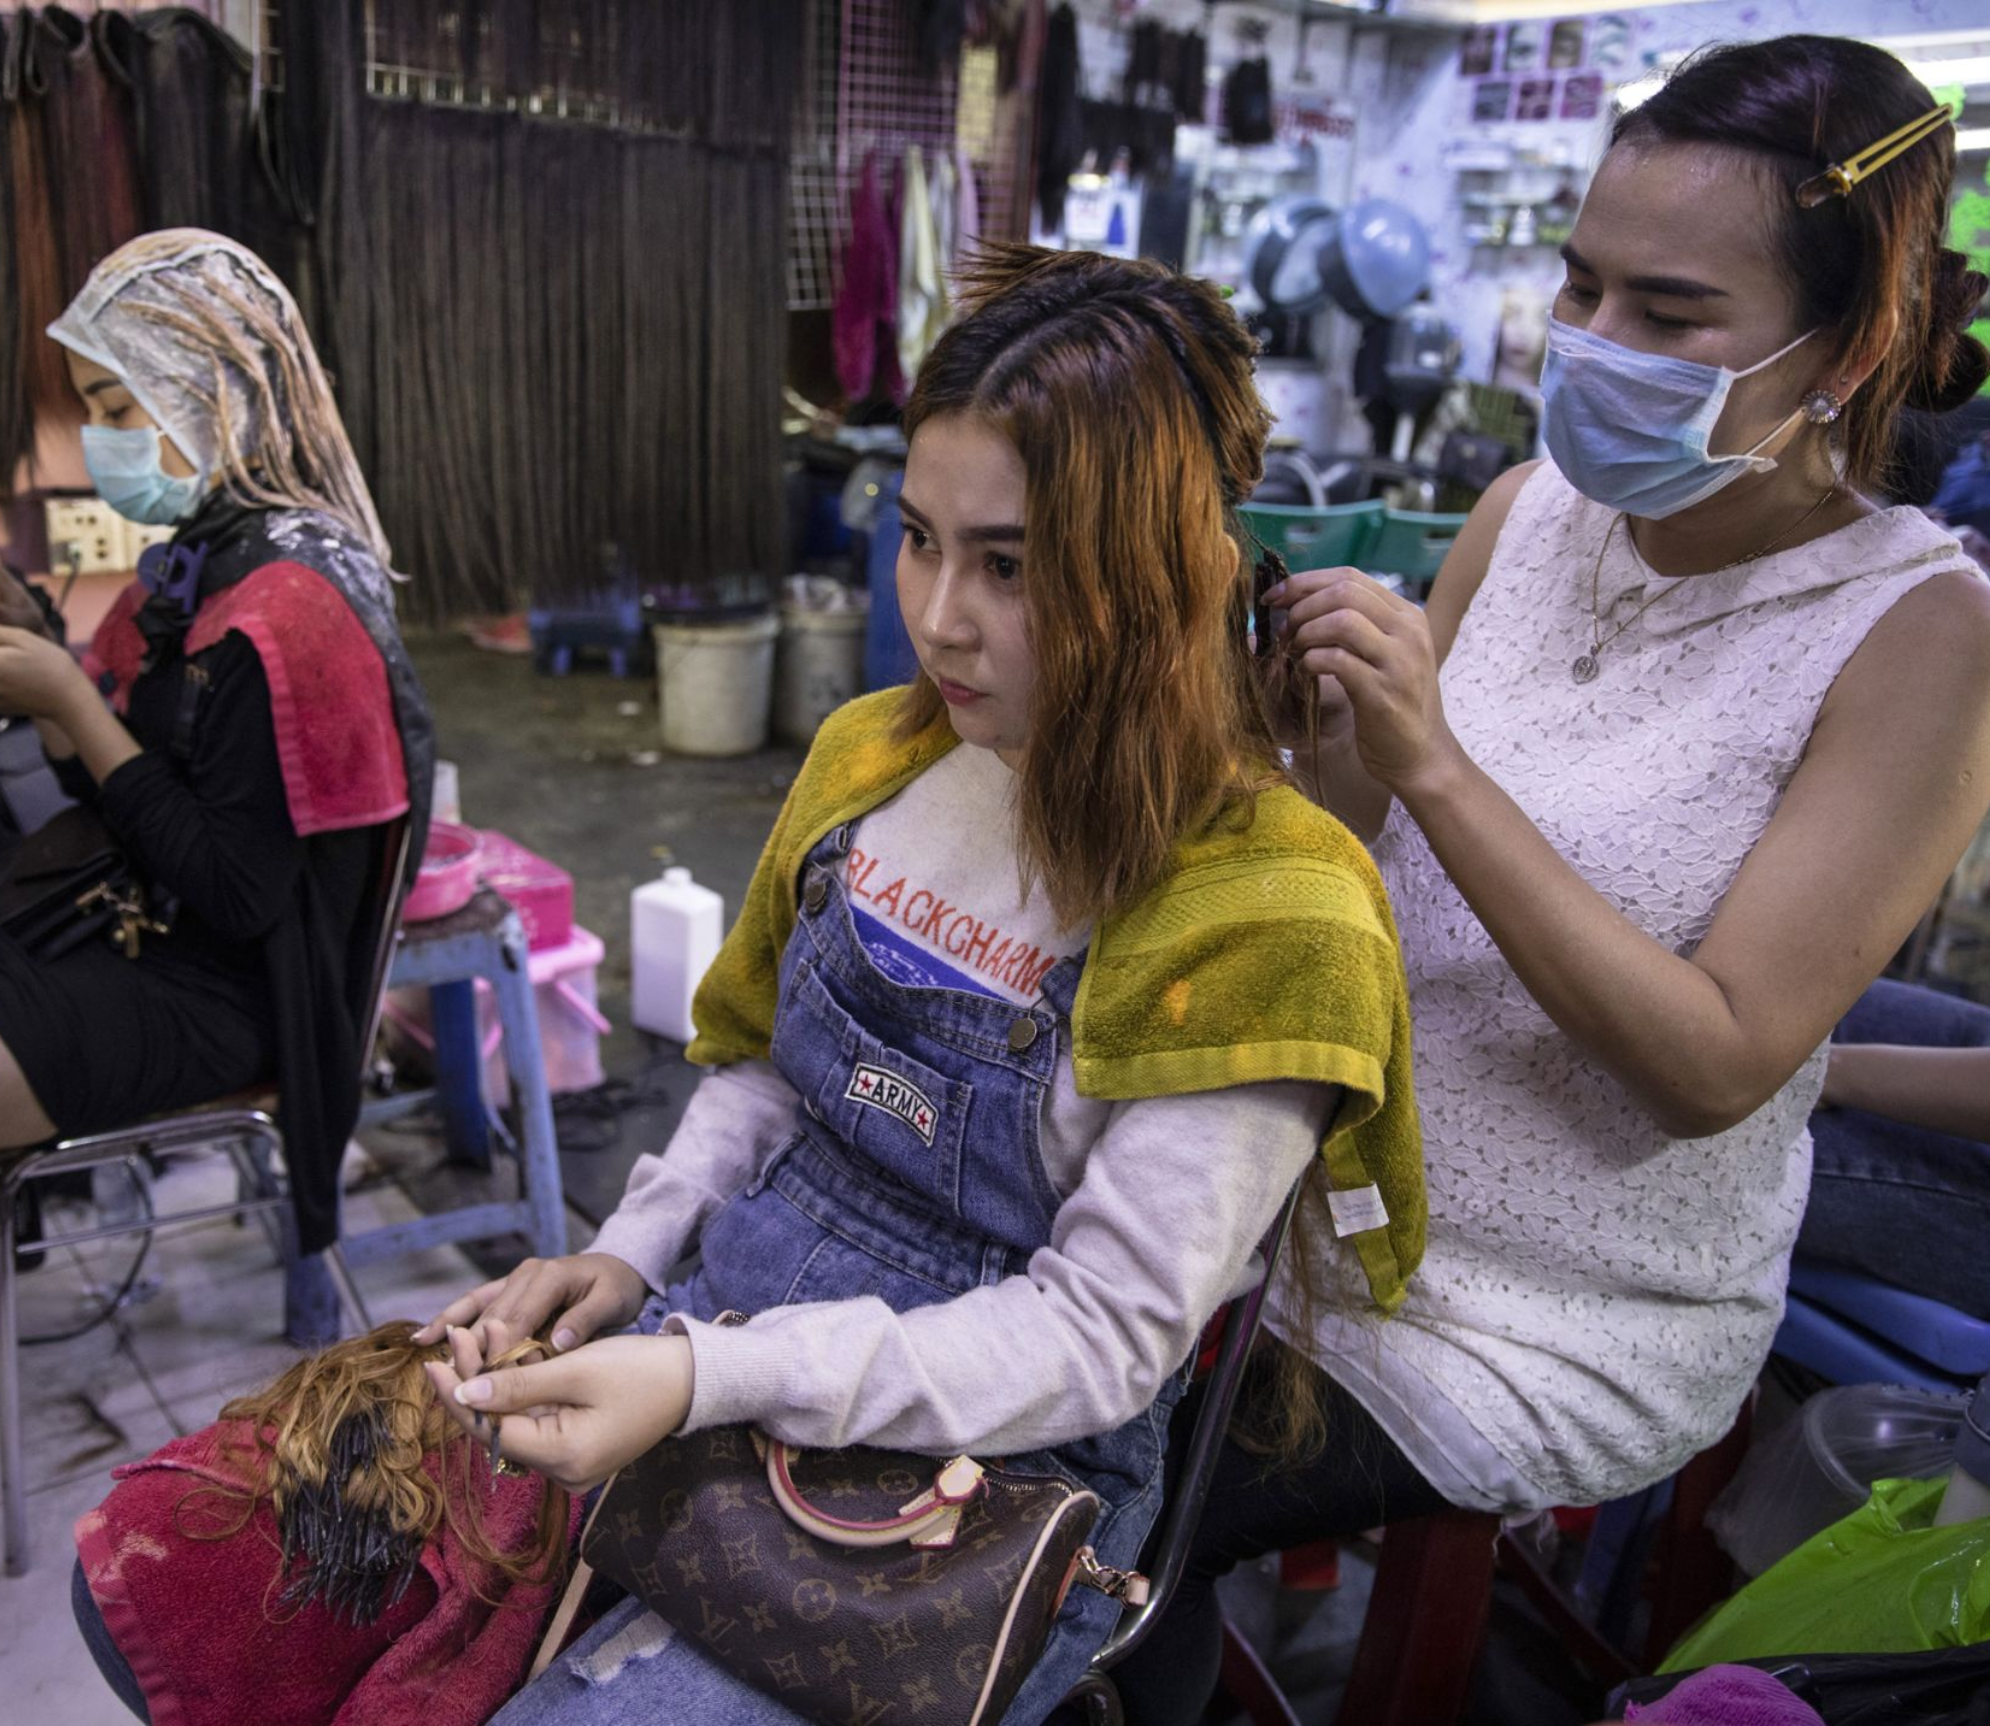 Hair salon owner Meyly Heng places a hair extension on a customer in Phnom Penh. Image by Paula Bronstein. Cambodia, 2019.